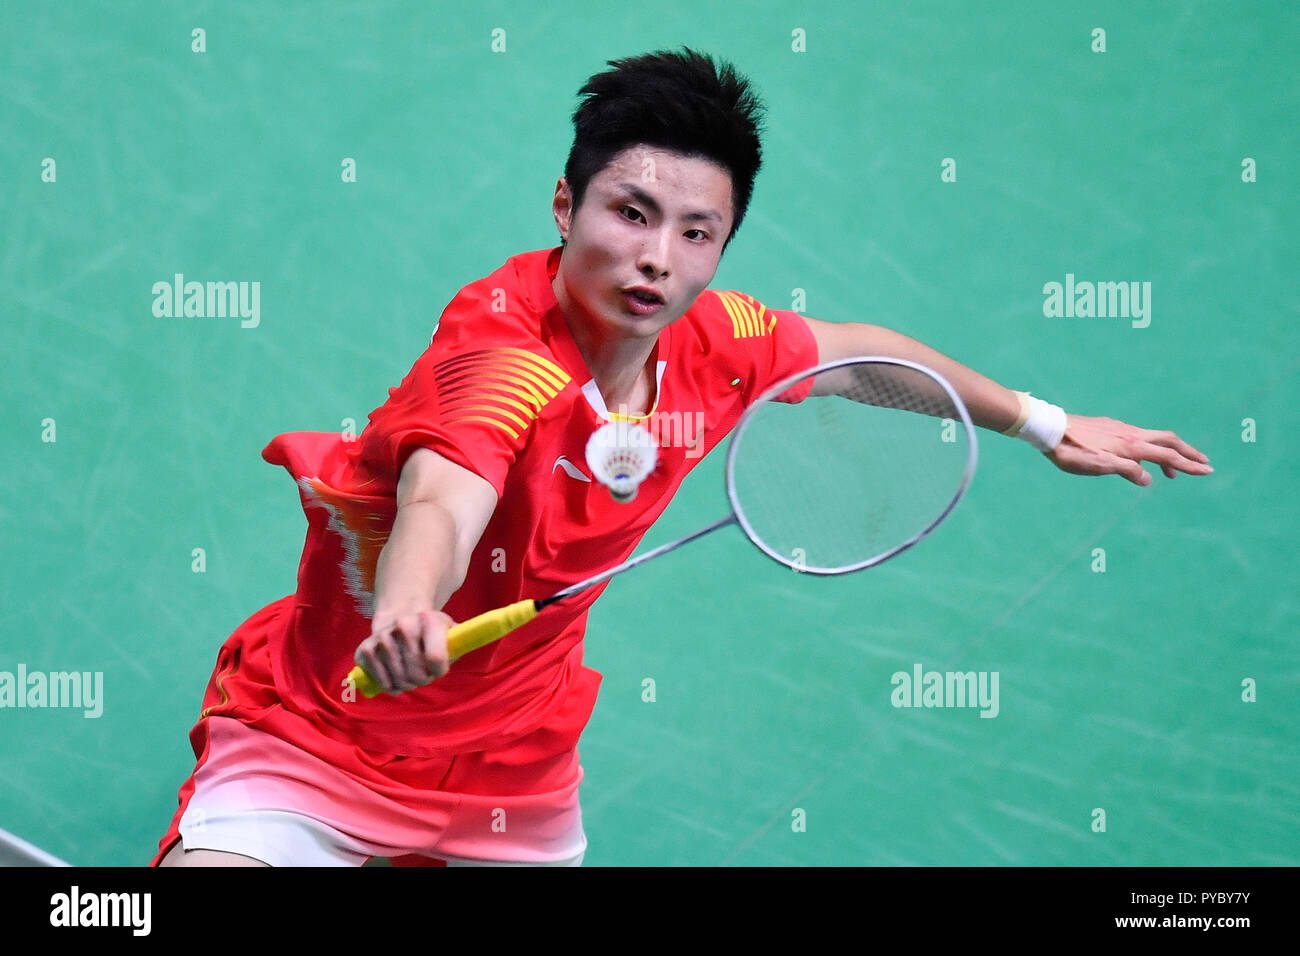 Paris. 27th Oct, 2018. Shi Yuqi of China competes during the mens singles semifinal against Rasmus Gemke of Denmark at 2018 Yonex French Open in Paris, France on Oct